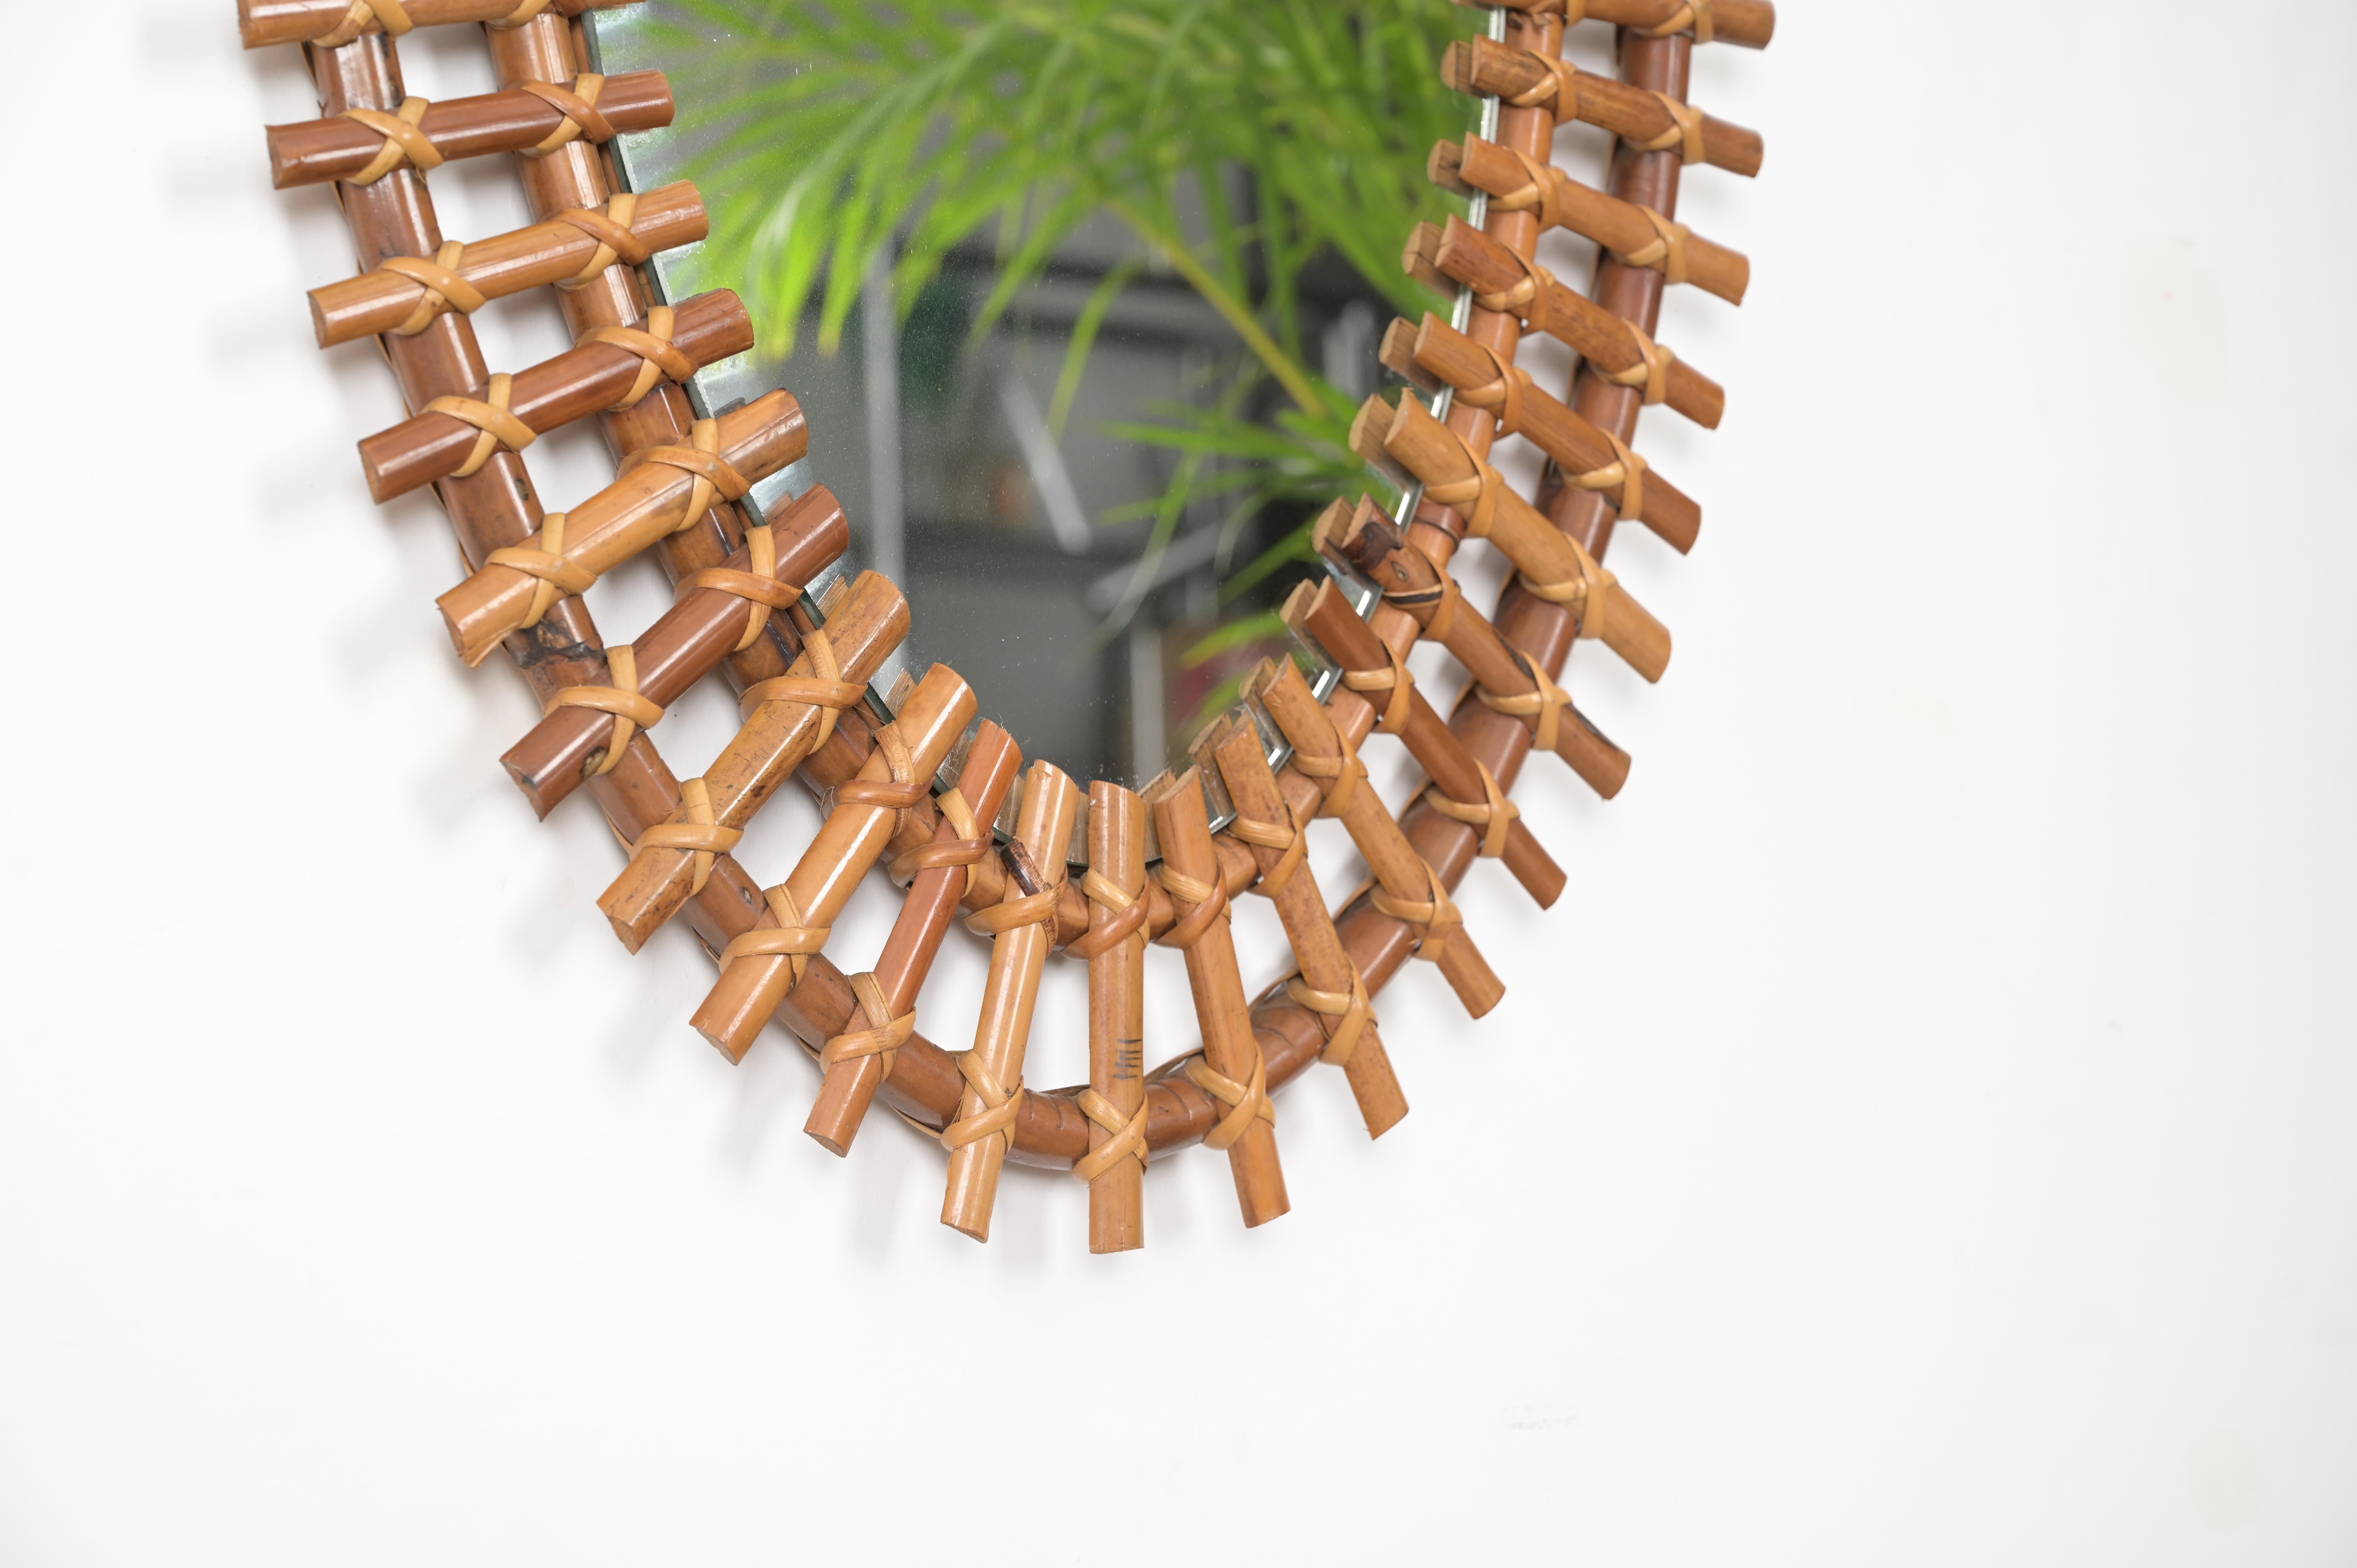 Hand-Crafted Midcentury French Riviera Oval Mirror in Rattan Wicker and Bamboo, Italy 1960s For Sale